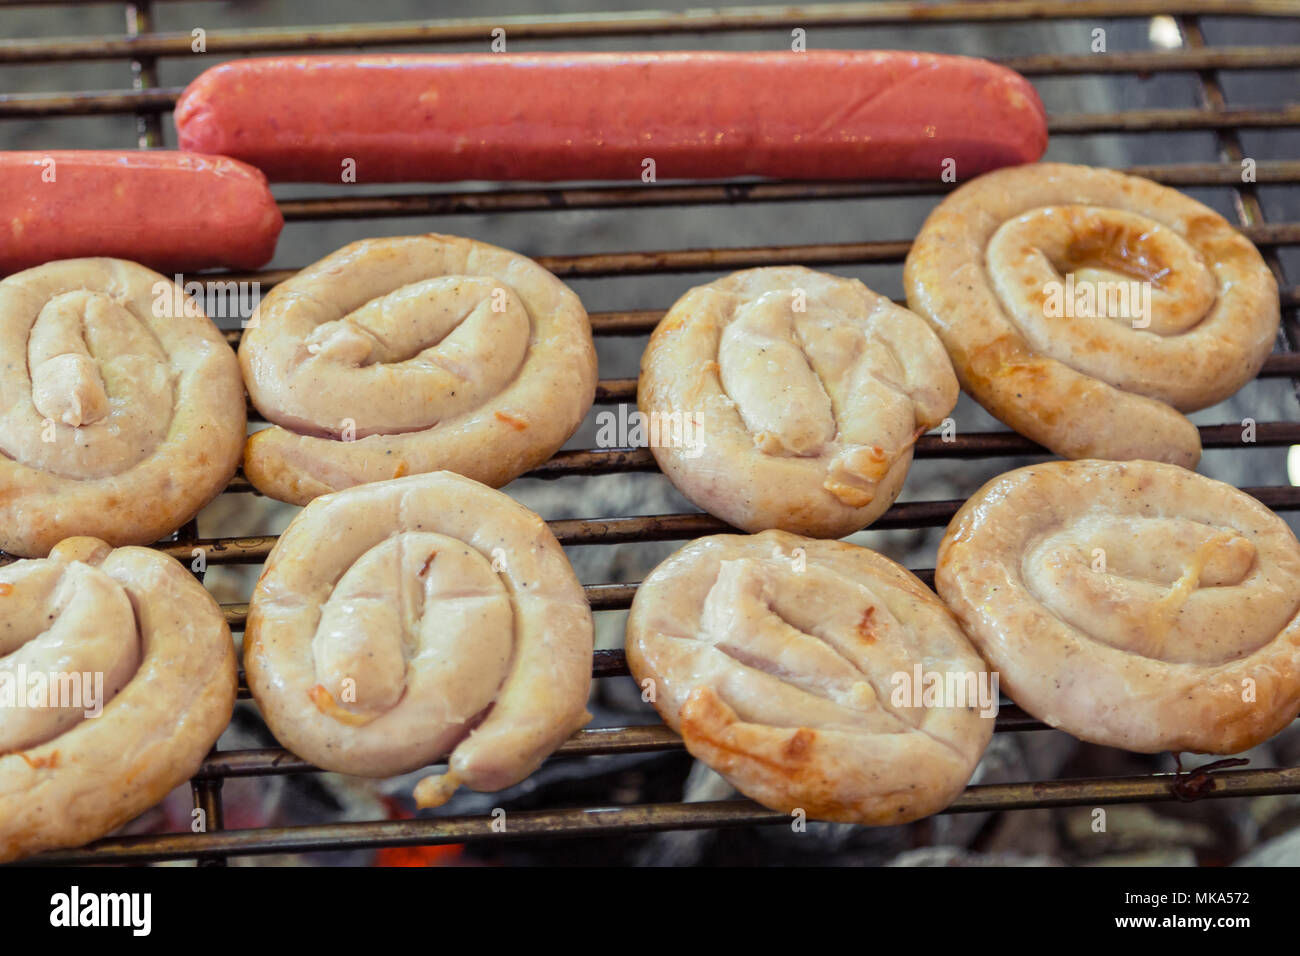 Sausages on the grill. Delicious german sausages or bratwurst on the barbecue grill. Grilled sausage on the flaming grill. Different sorts of sausages Stock Photo